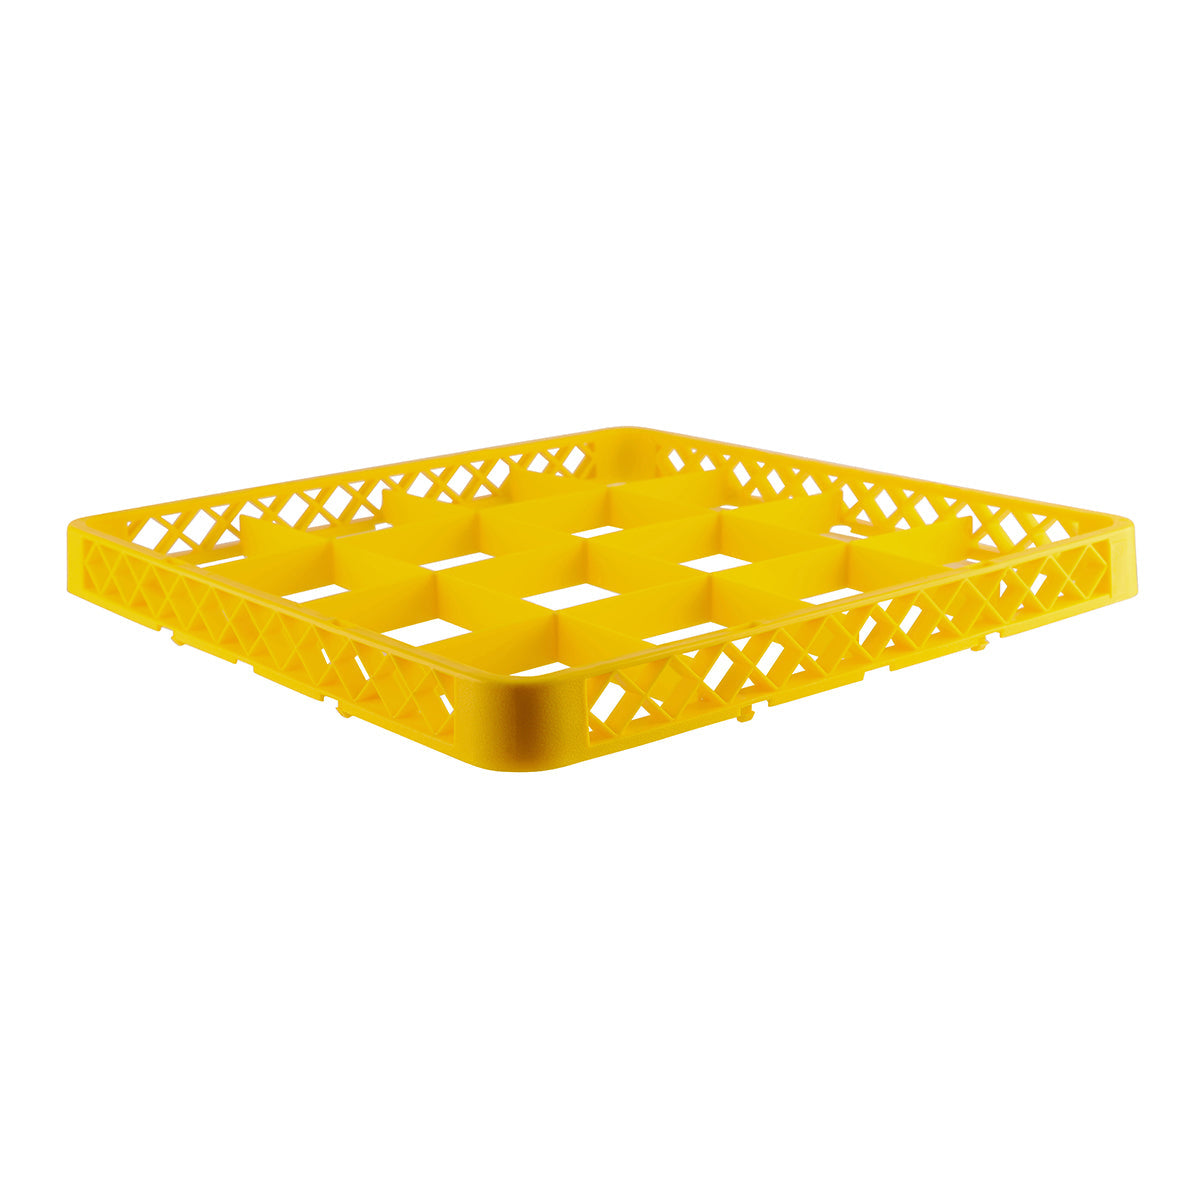 69817-Y Chef Inox Wash Rack Extender 16 Compartment Yellow 500x500x45mm Tomkin Australia Hospitality Supplies